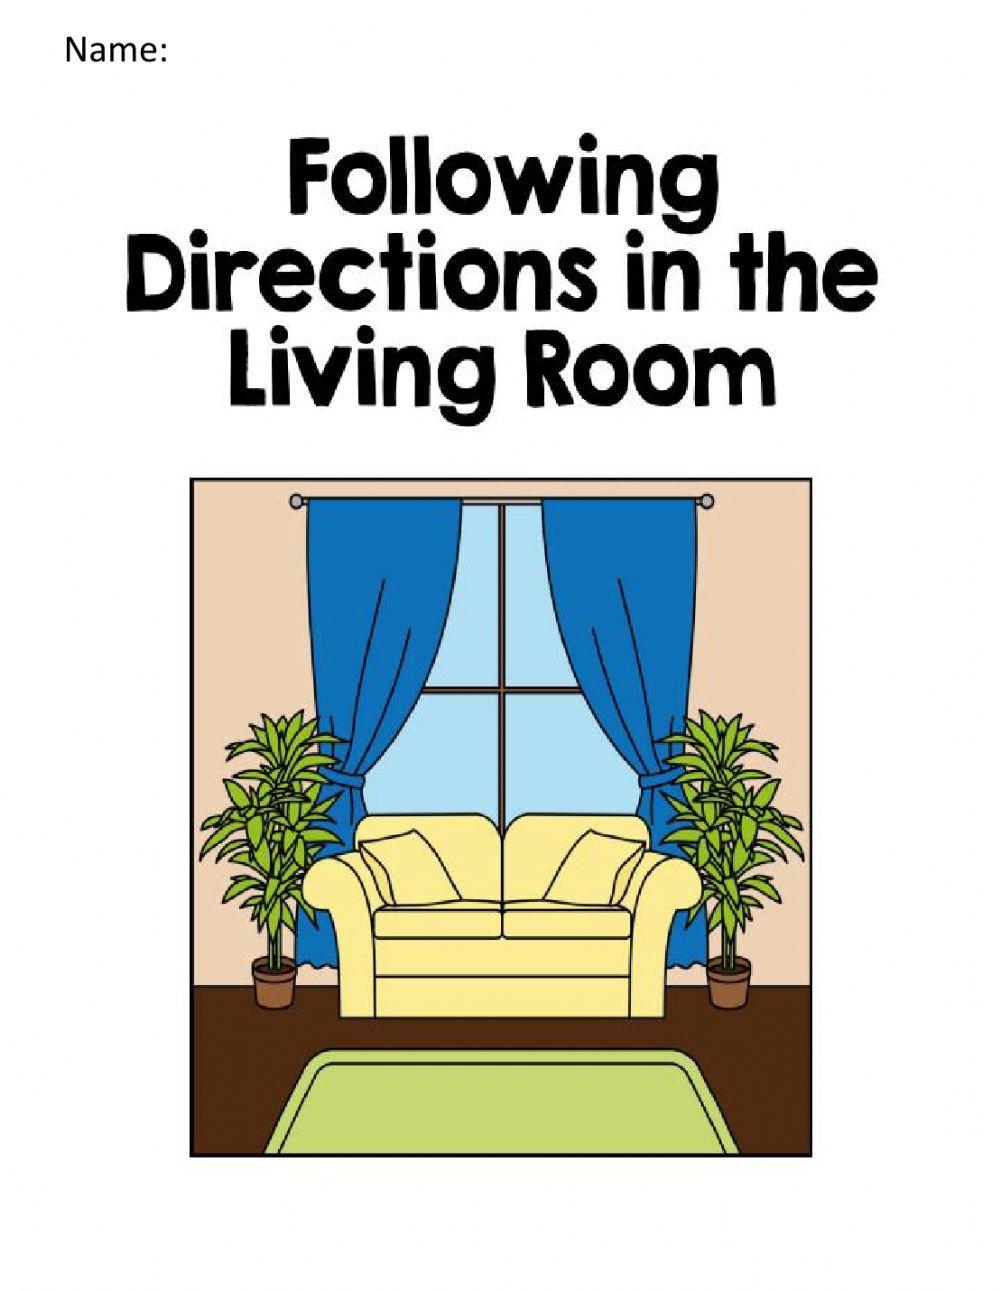 Following directions in the living room